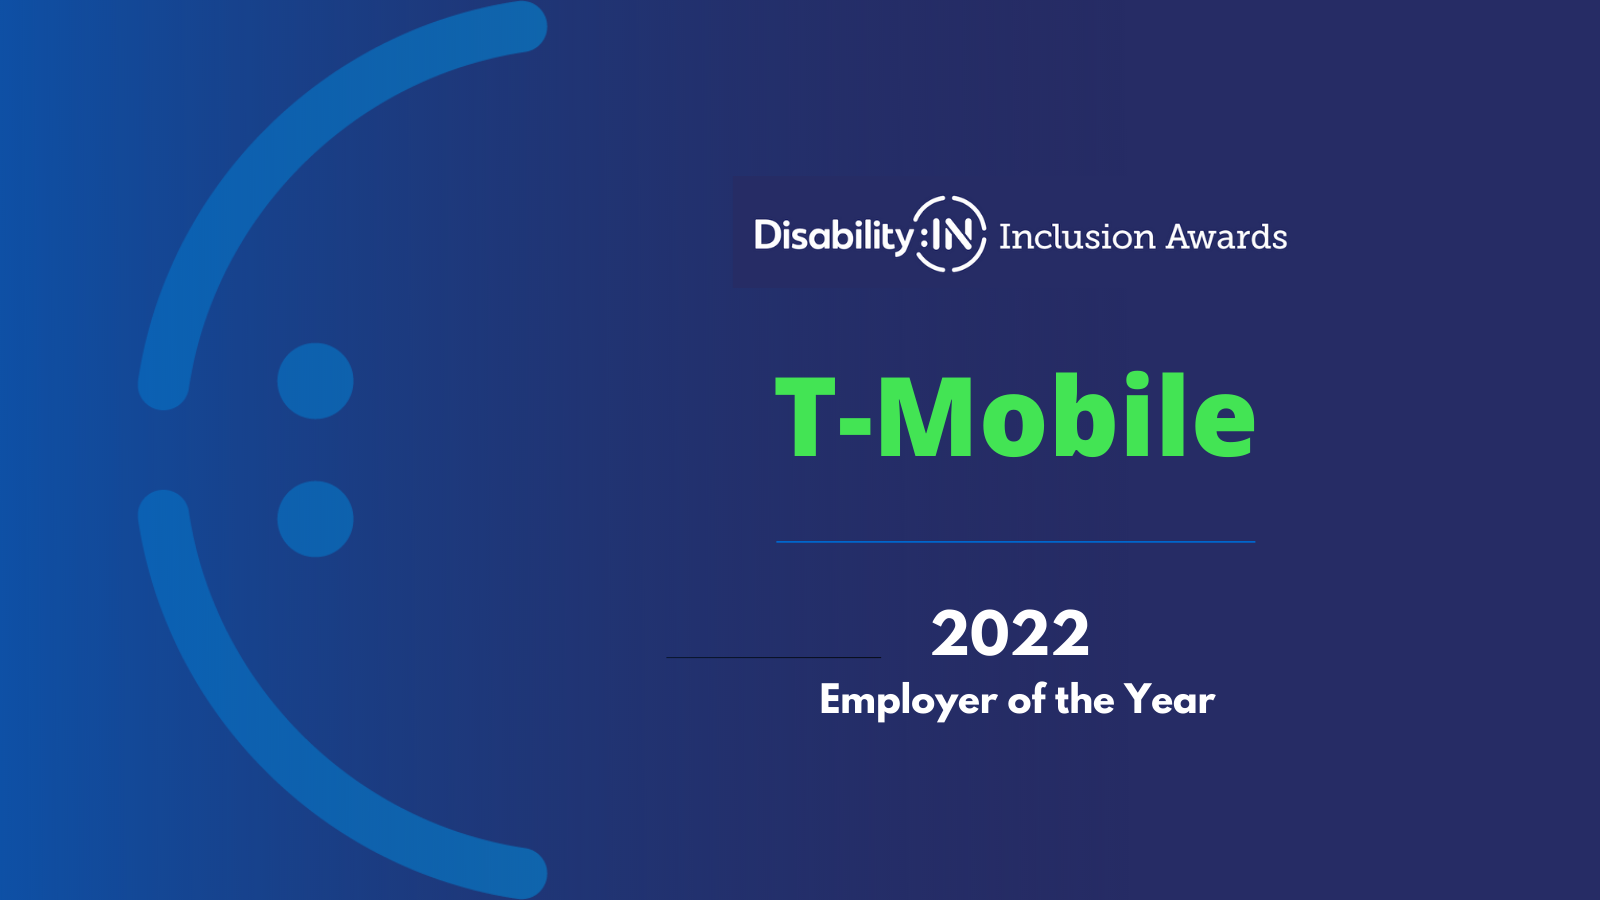 Inclusion Award Employer of the Year: T-Mobile